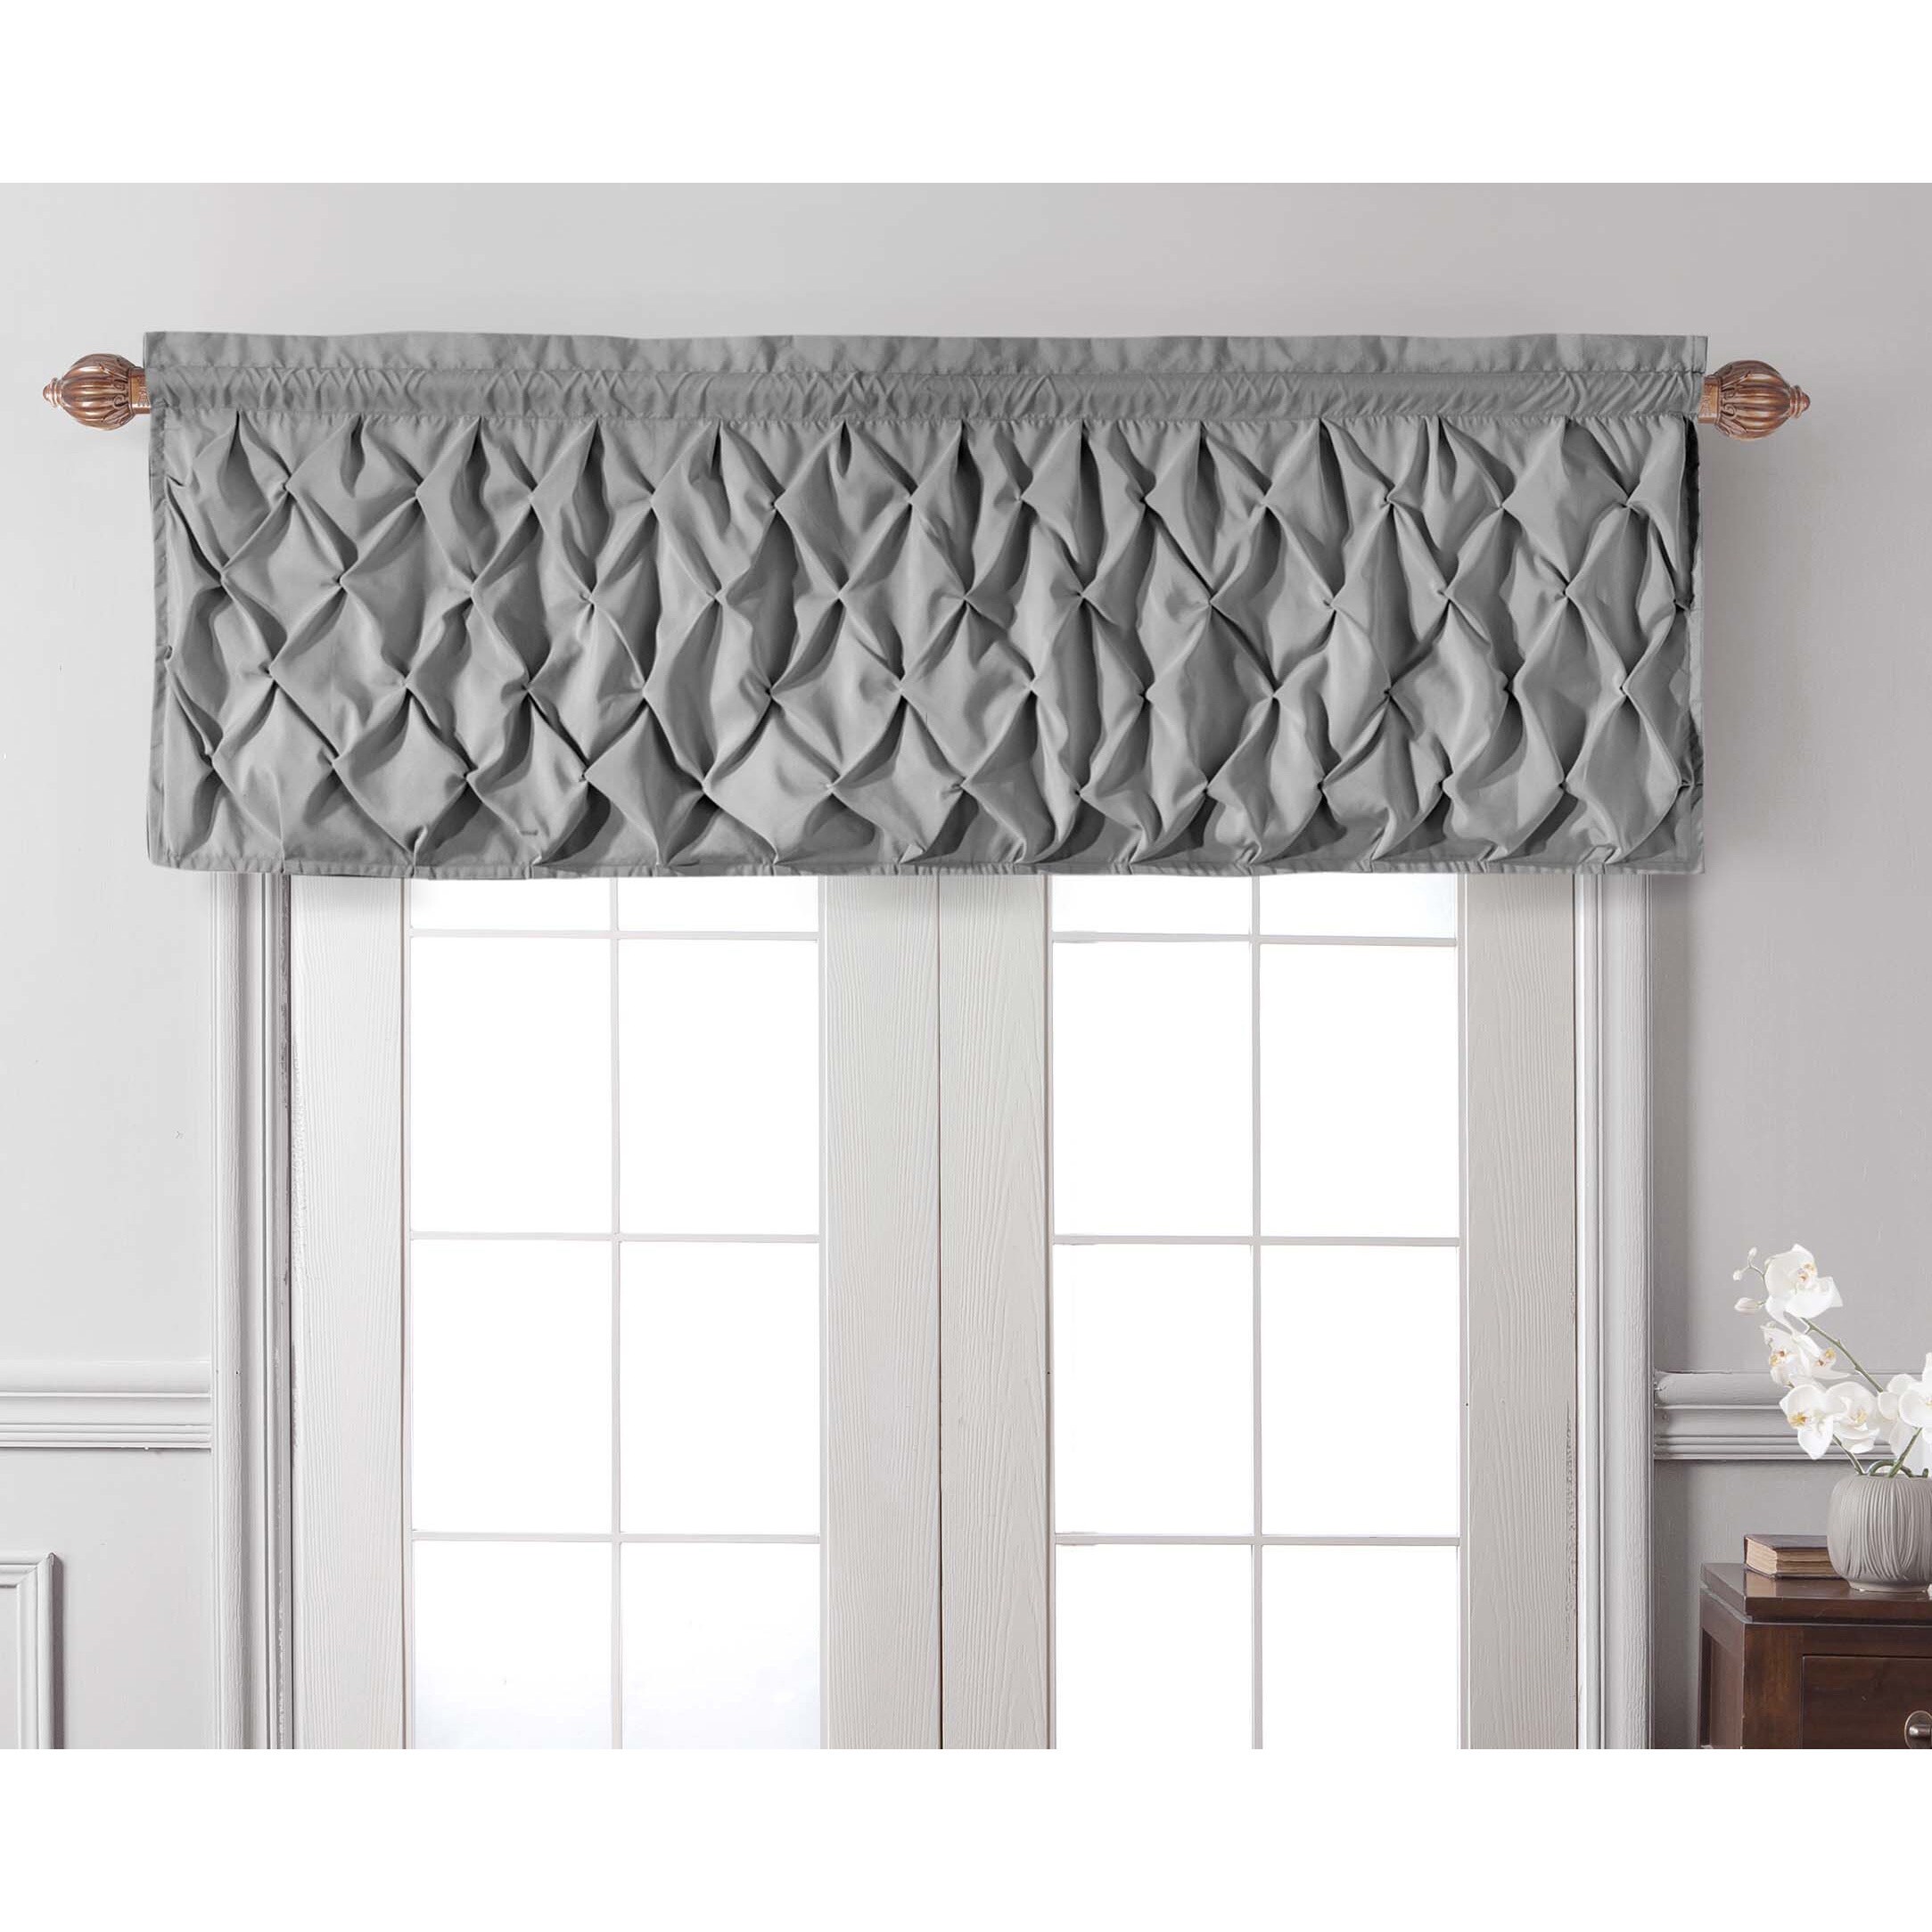 Buy Valances Online At Overstock Our Best Window Treatments Deals